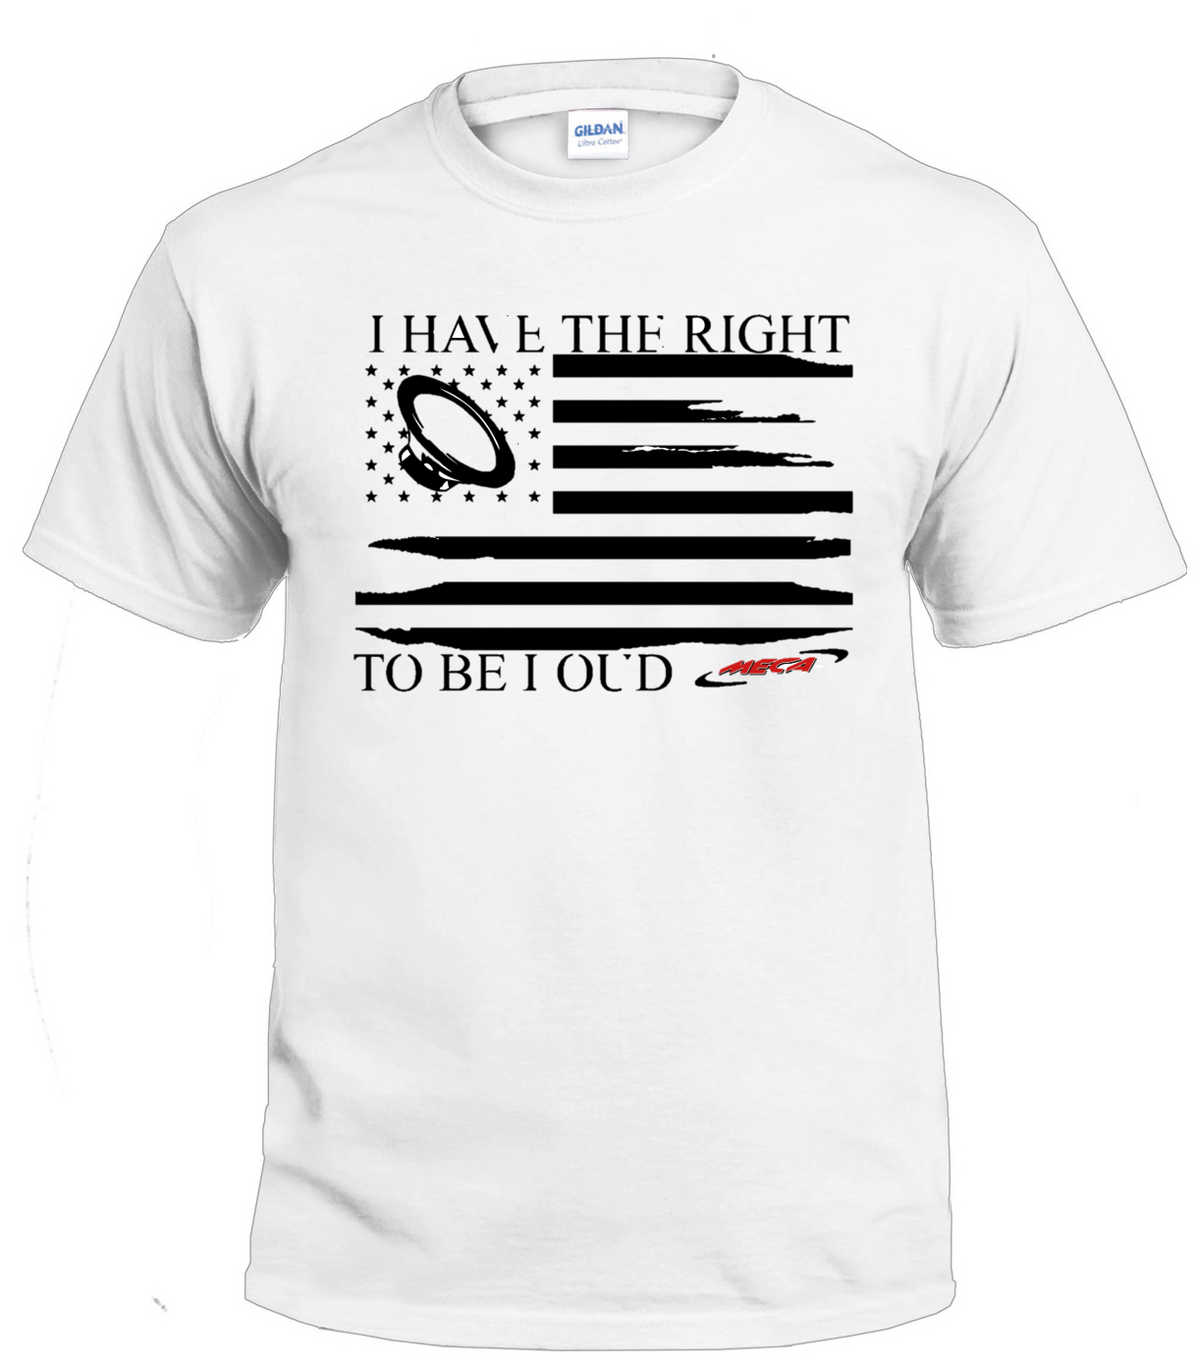 I Have The Right To Be Loud t-shirt